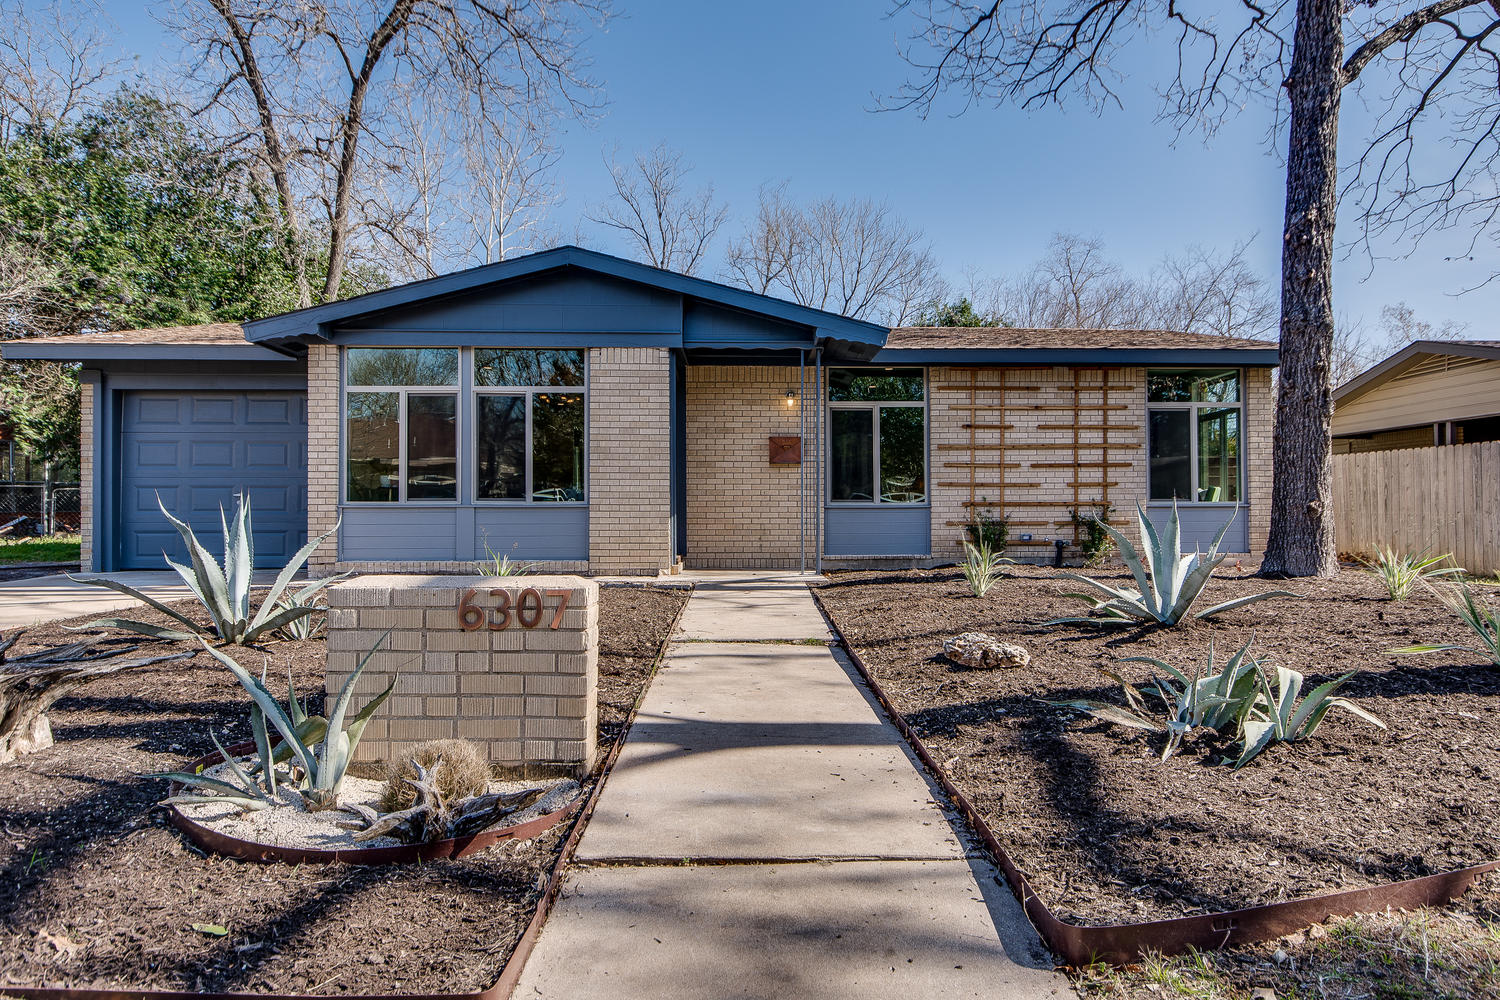 Meet Peggy Blue A 1950s Tract House Renovation Home